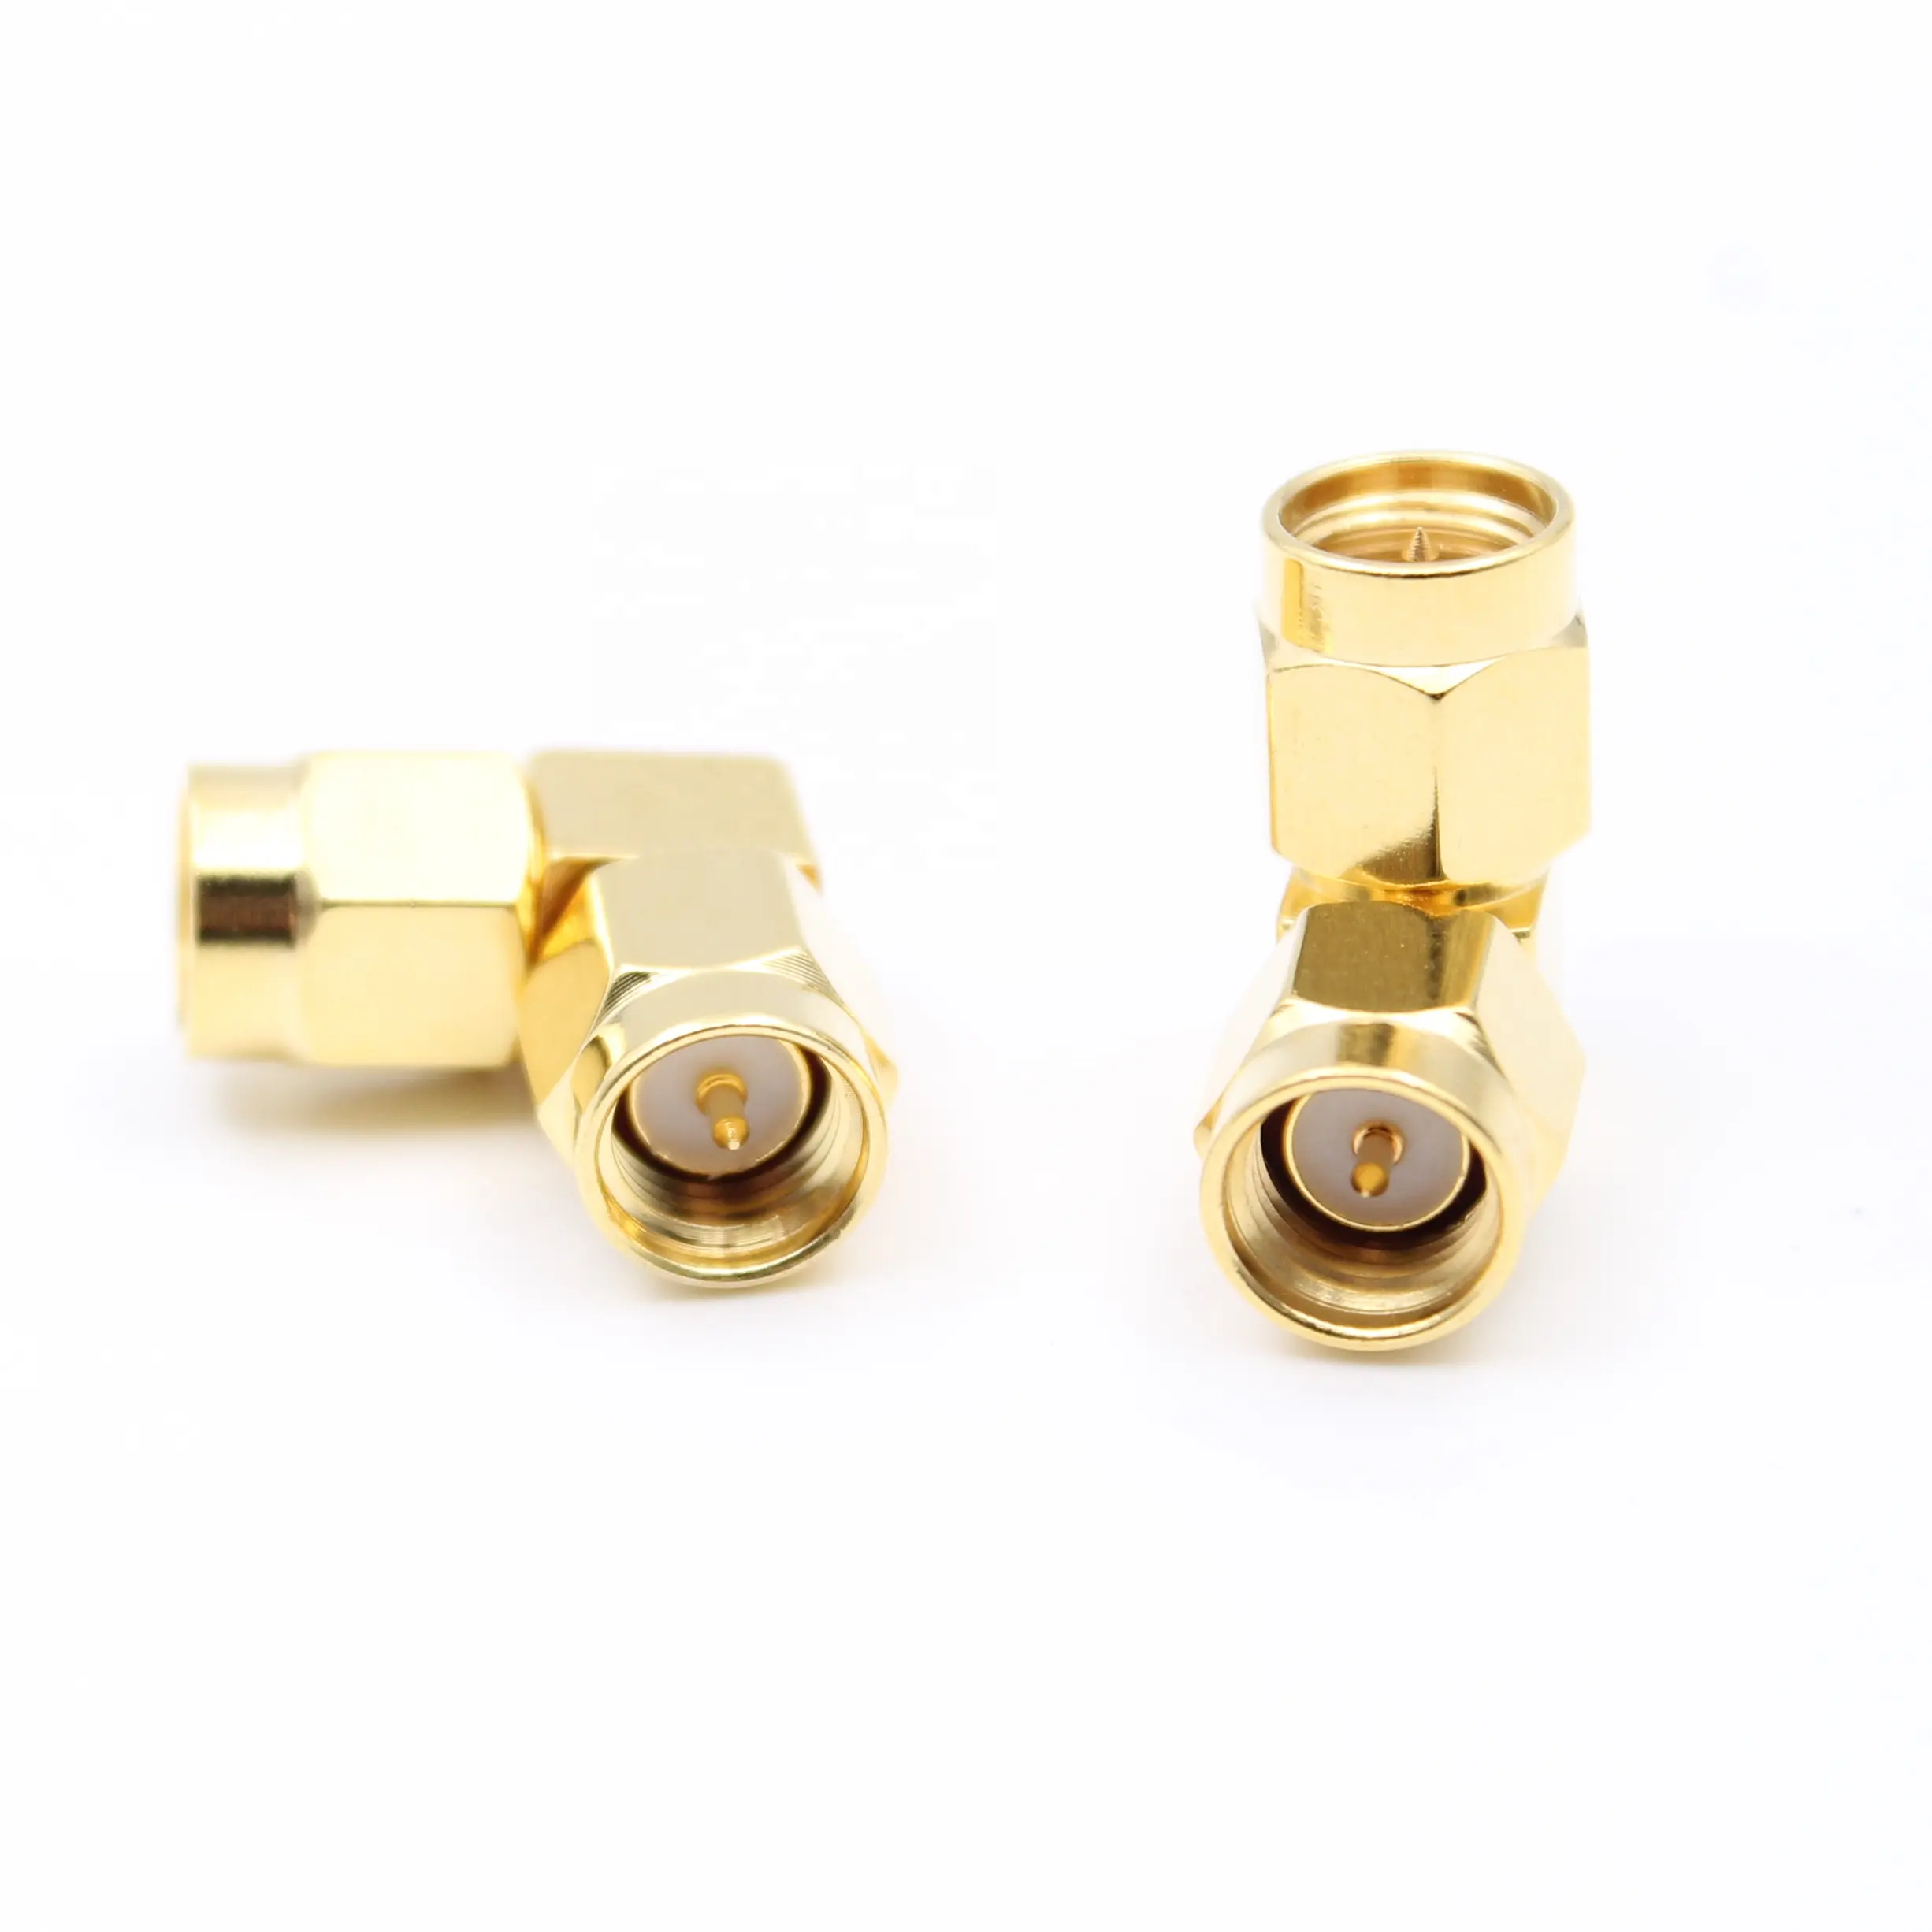 TRL Precision Adapter SMA Male To Male Right Angle Frequency Up To 18GHz SMA-JWJ